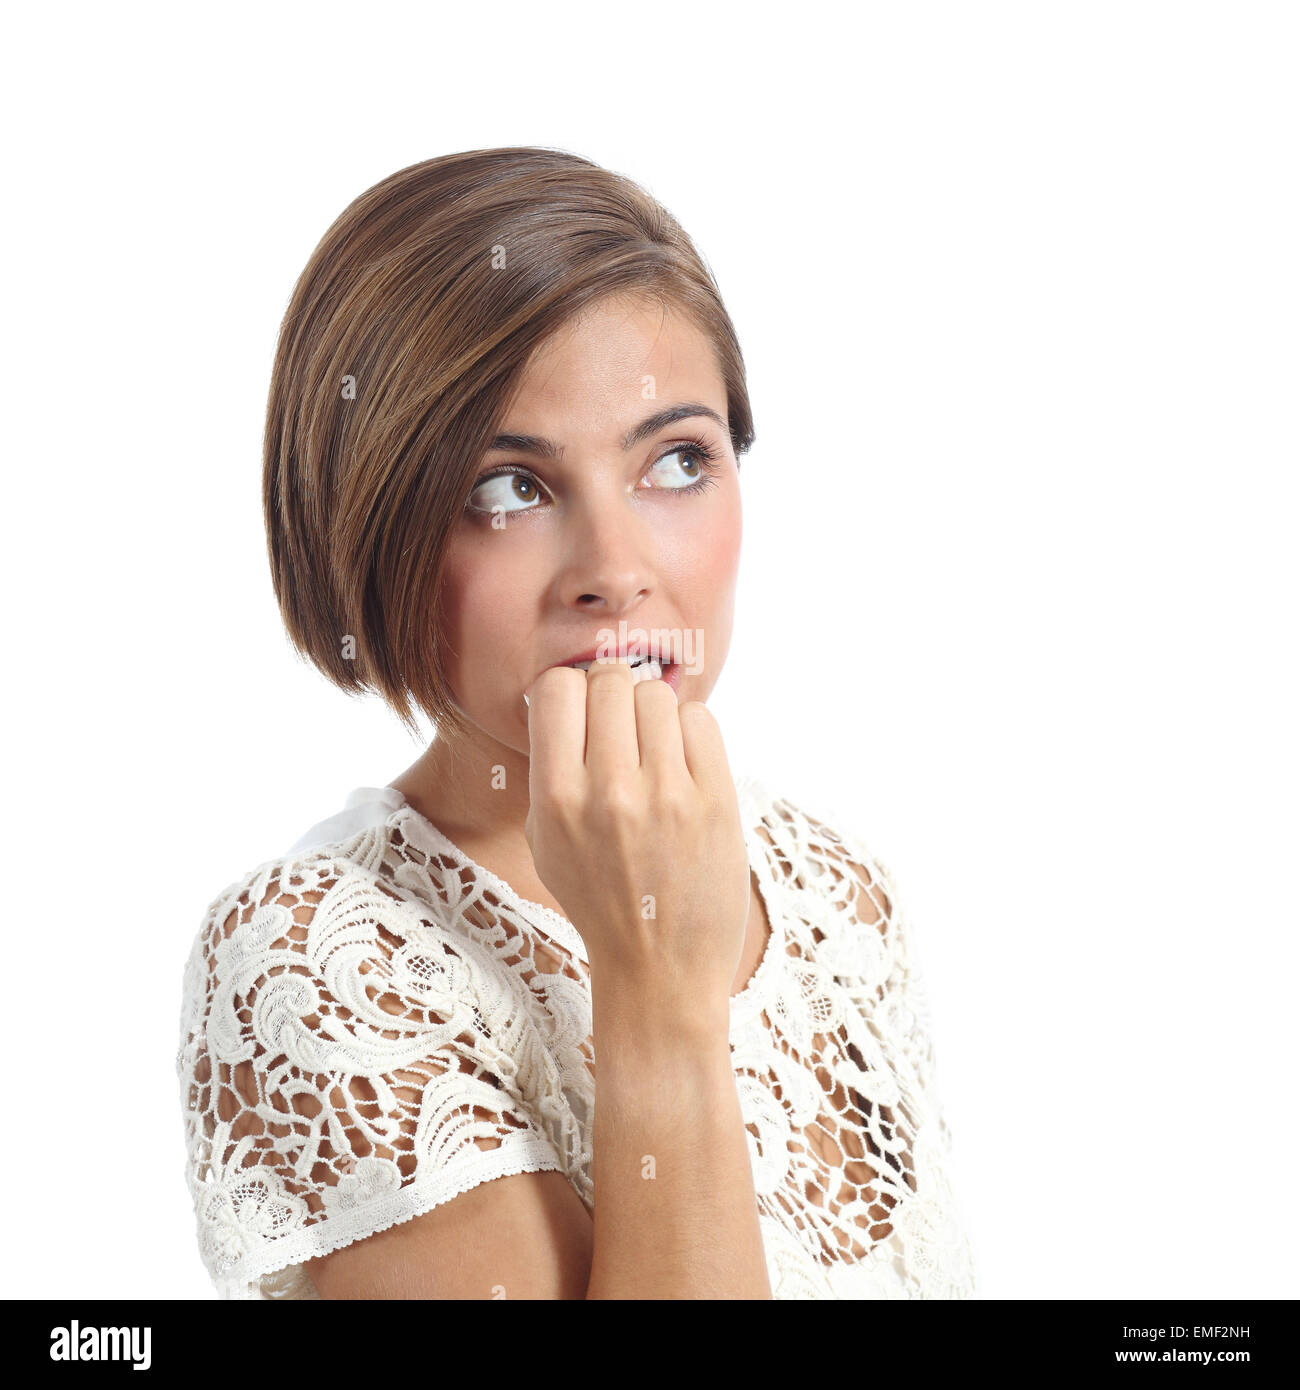 Nervous pensive woman biting nails isolated on a white background Stock Photo